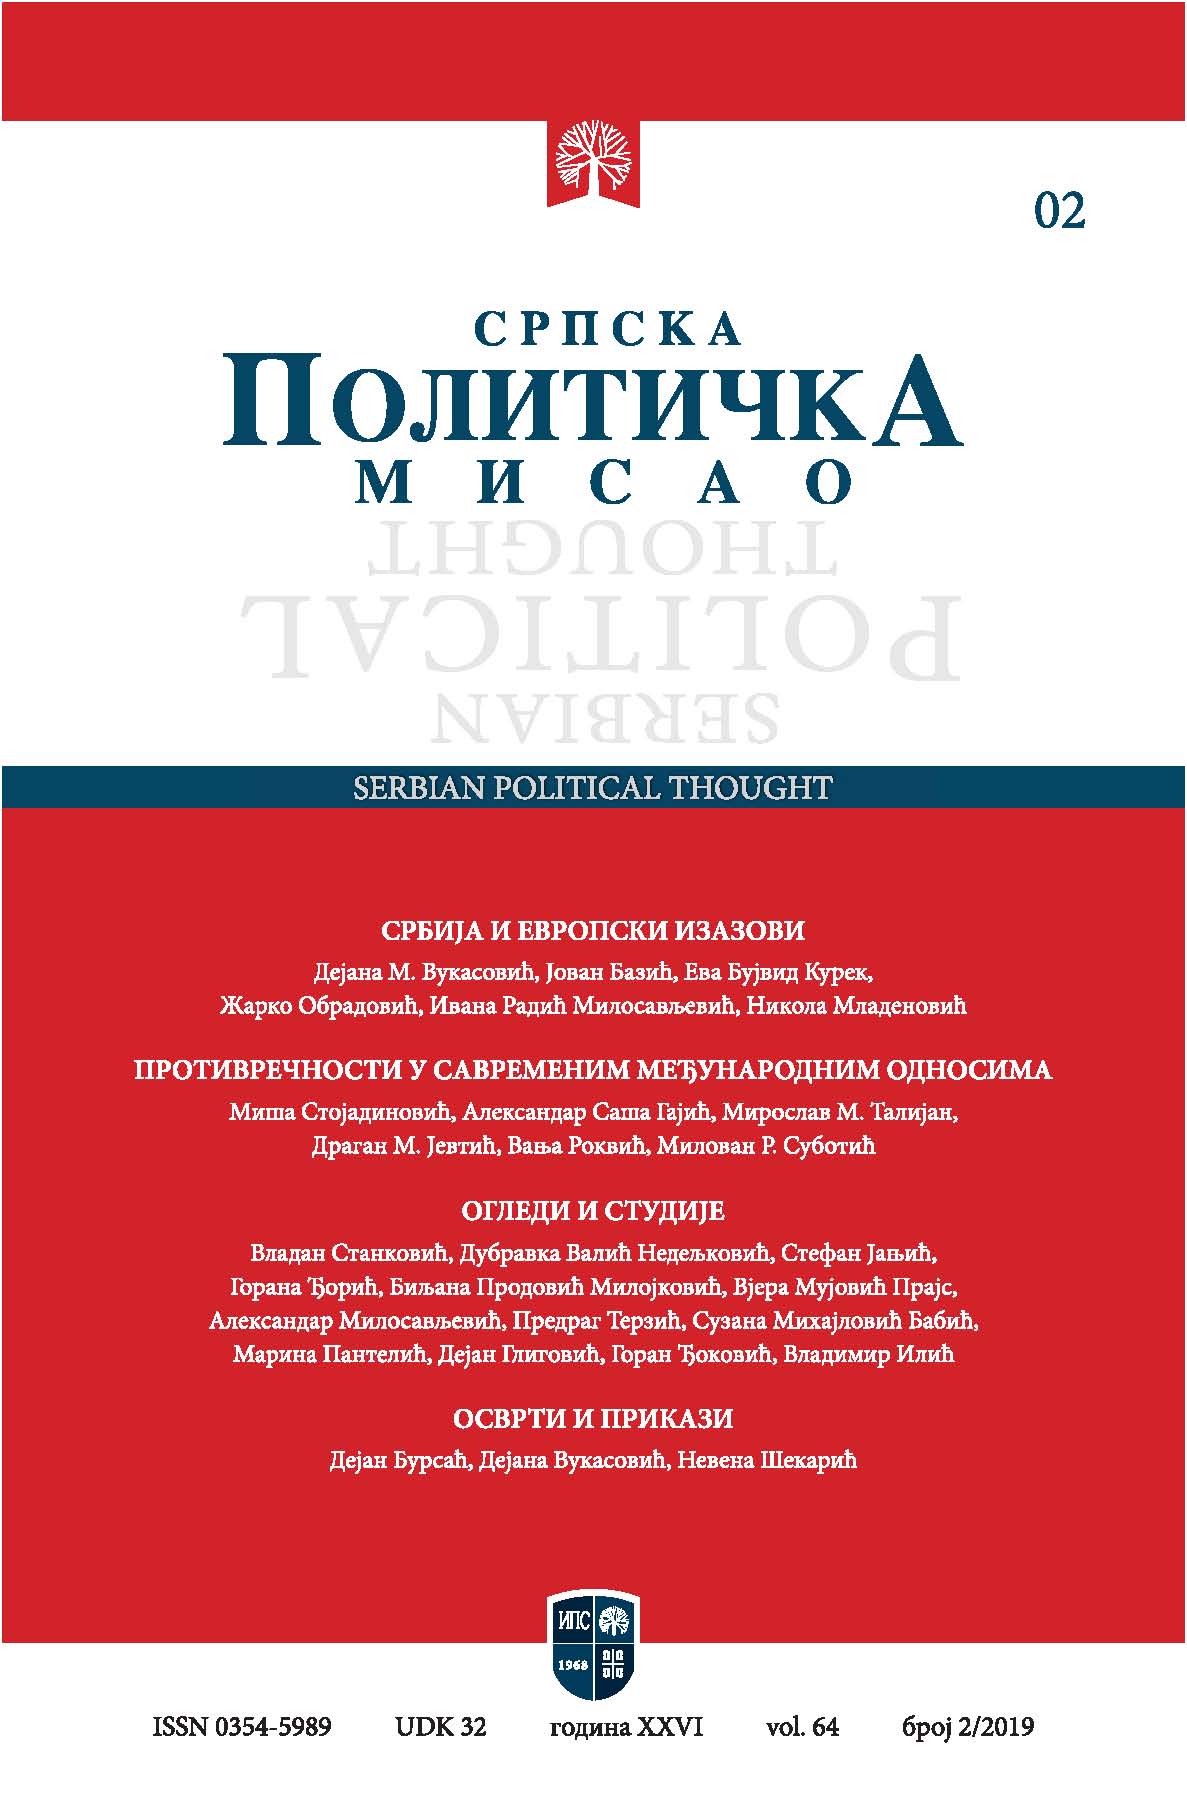 DISCOURSE STRATEGIES IN REPORTING ON
THE ELECTION OF MEMBERS OF NATIONAL COUNCILS OF NATIONAL MINORITIES IN SERBIA – ELECTION CYCLES 2014 AND 2018 Cover Image